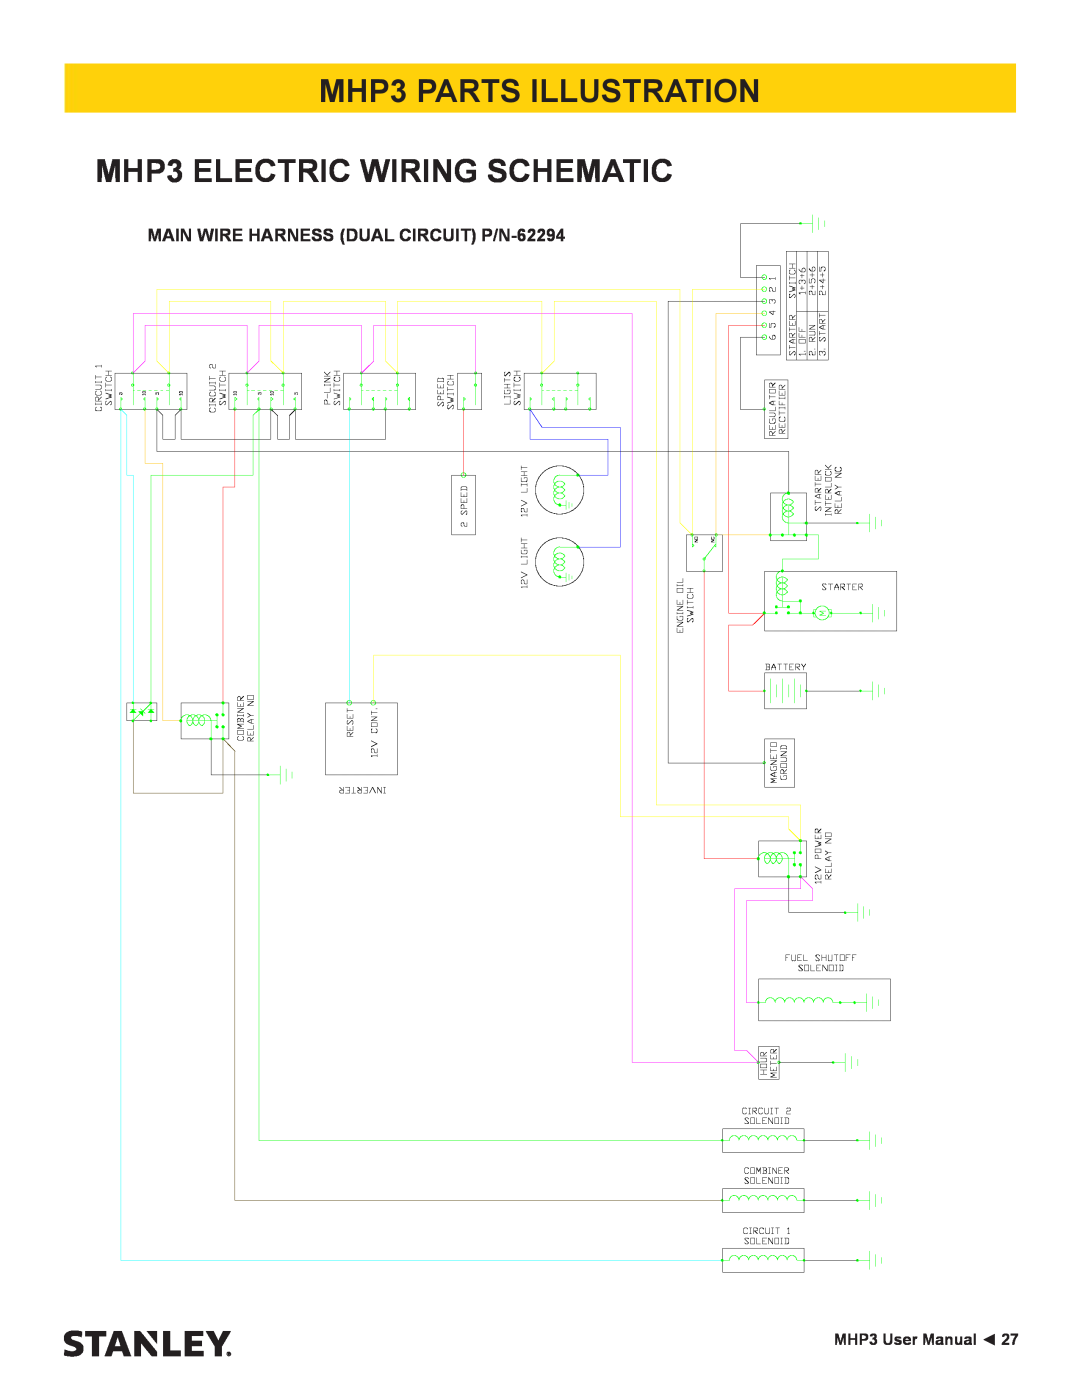 Stanley Black & Decker MHP3 PARTS ILLUSTRATION MHP3 ELECTRIC WIRING SCHEMATIC, MAIN WIRE HARNESS DUAL CIRCUIT P/N-62294 